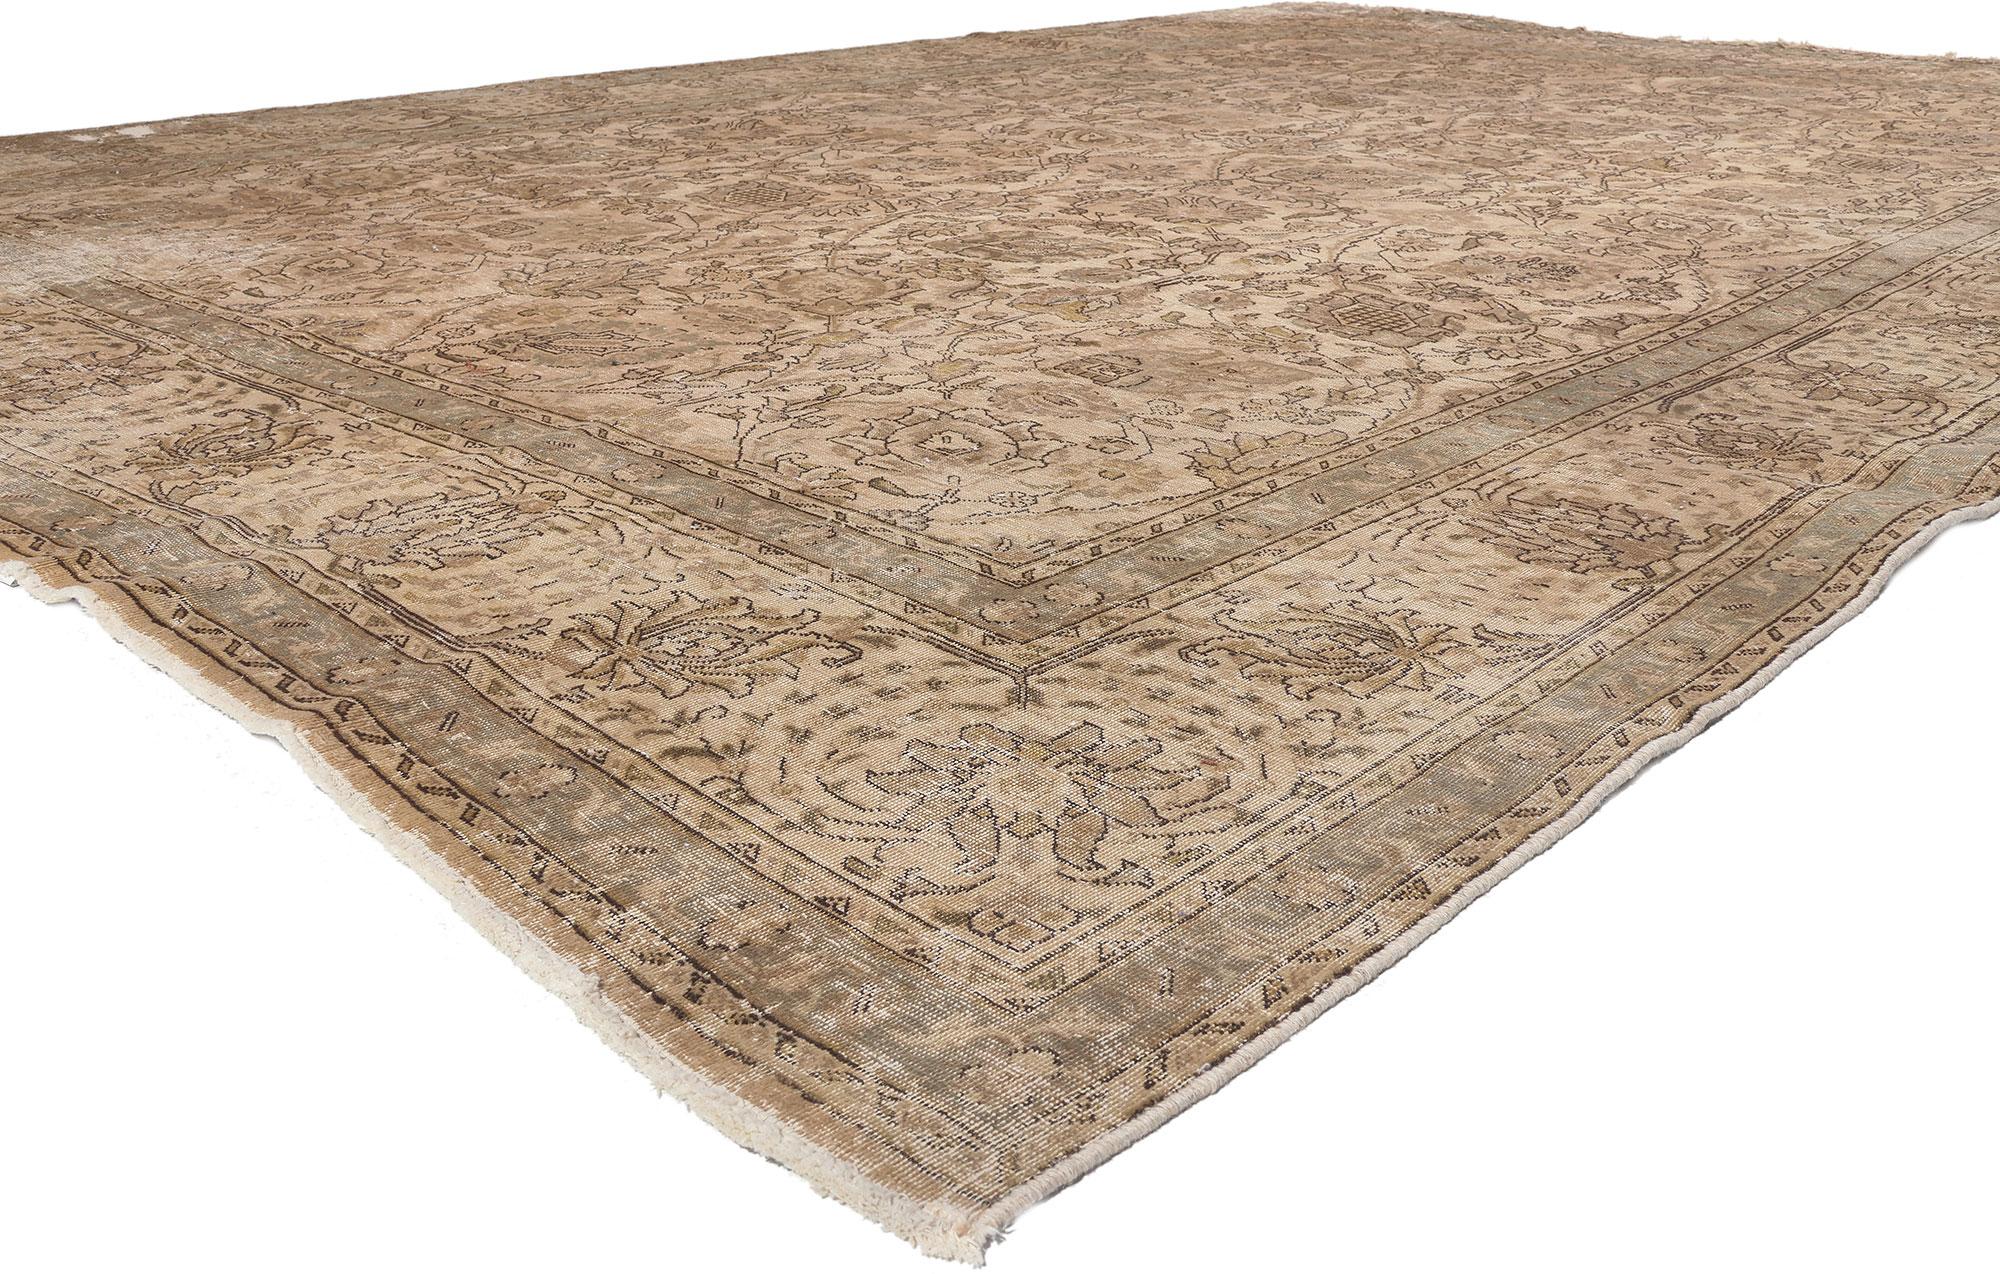 78583 Distressed Vintage Persian Tabriz Rug, 11'02 x 15​'06. 
Warm bucolic charm meets rustic sensibility in this distressed vintage Persian Tabriz rug. The weathered botanical design and faded earthy woven into this piece work together creating a